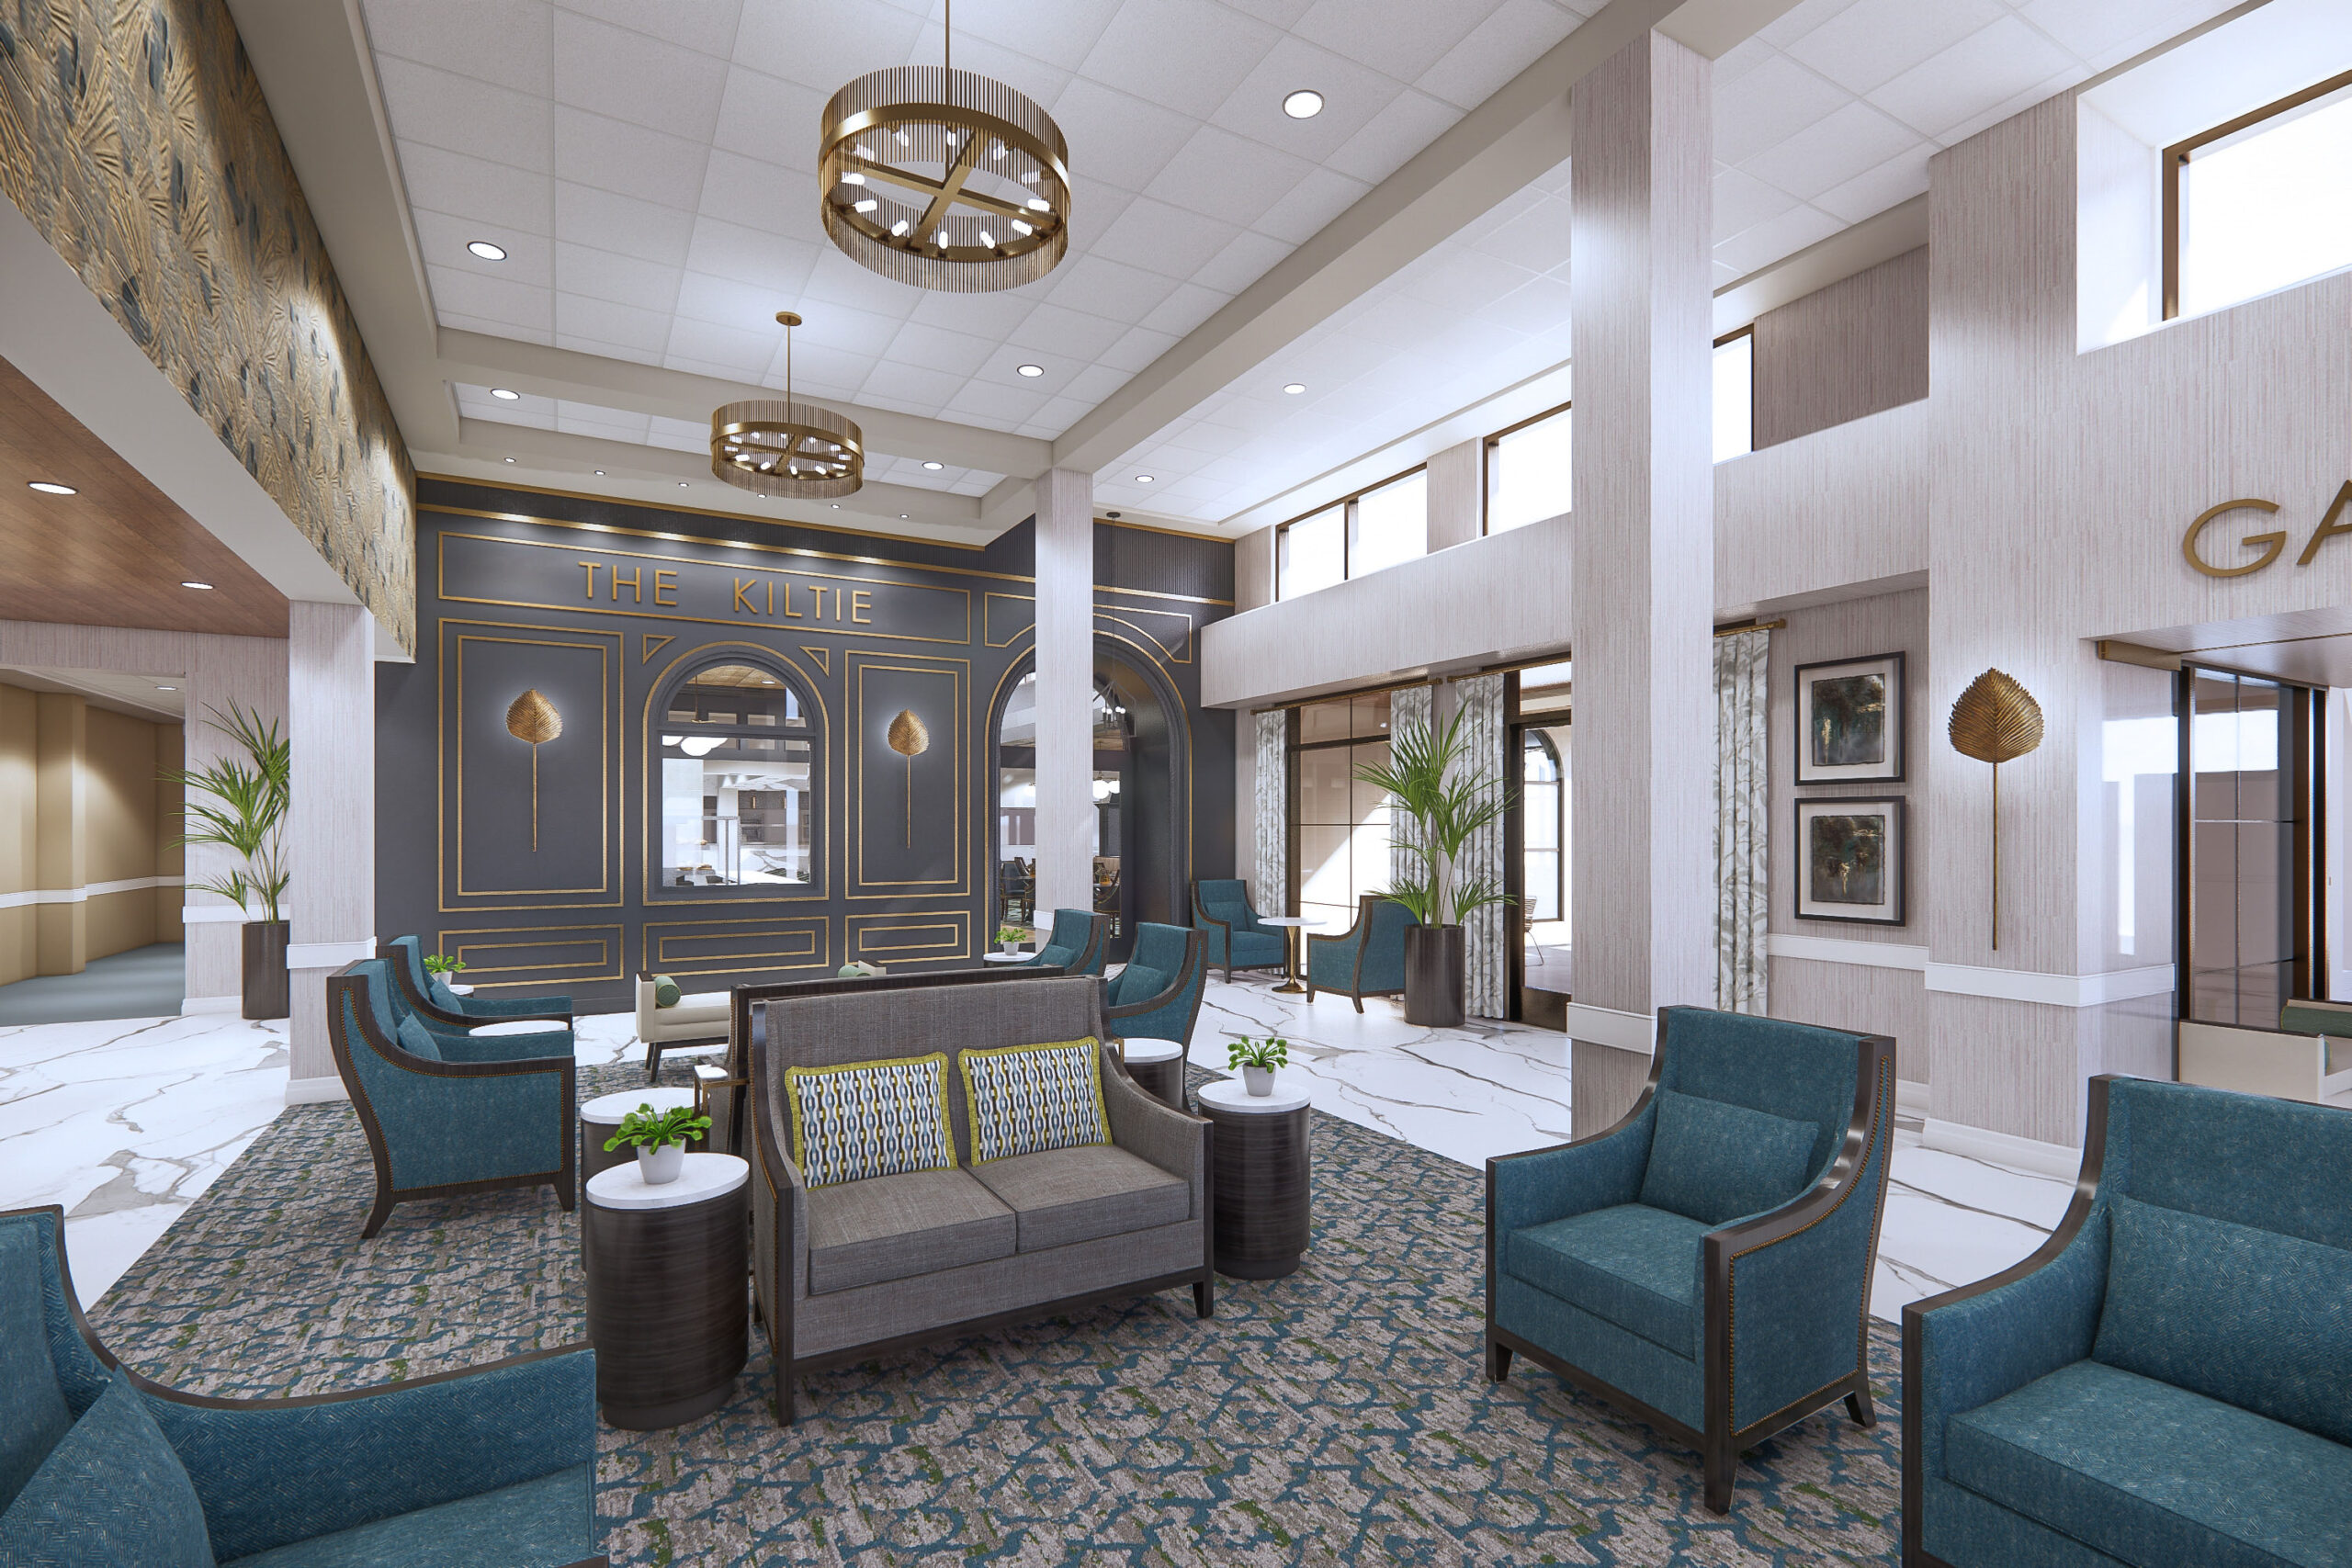 Exciting Changes and Enhanced Amenities, Coming Soon!